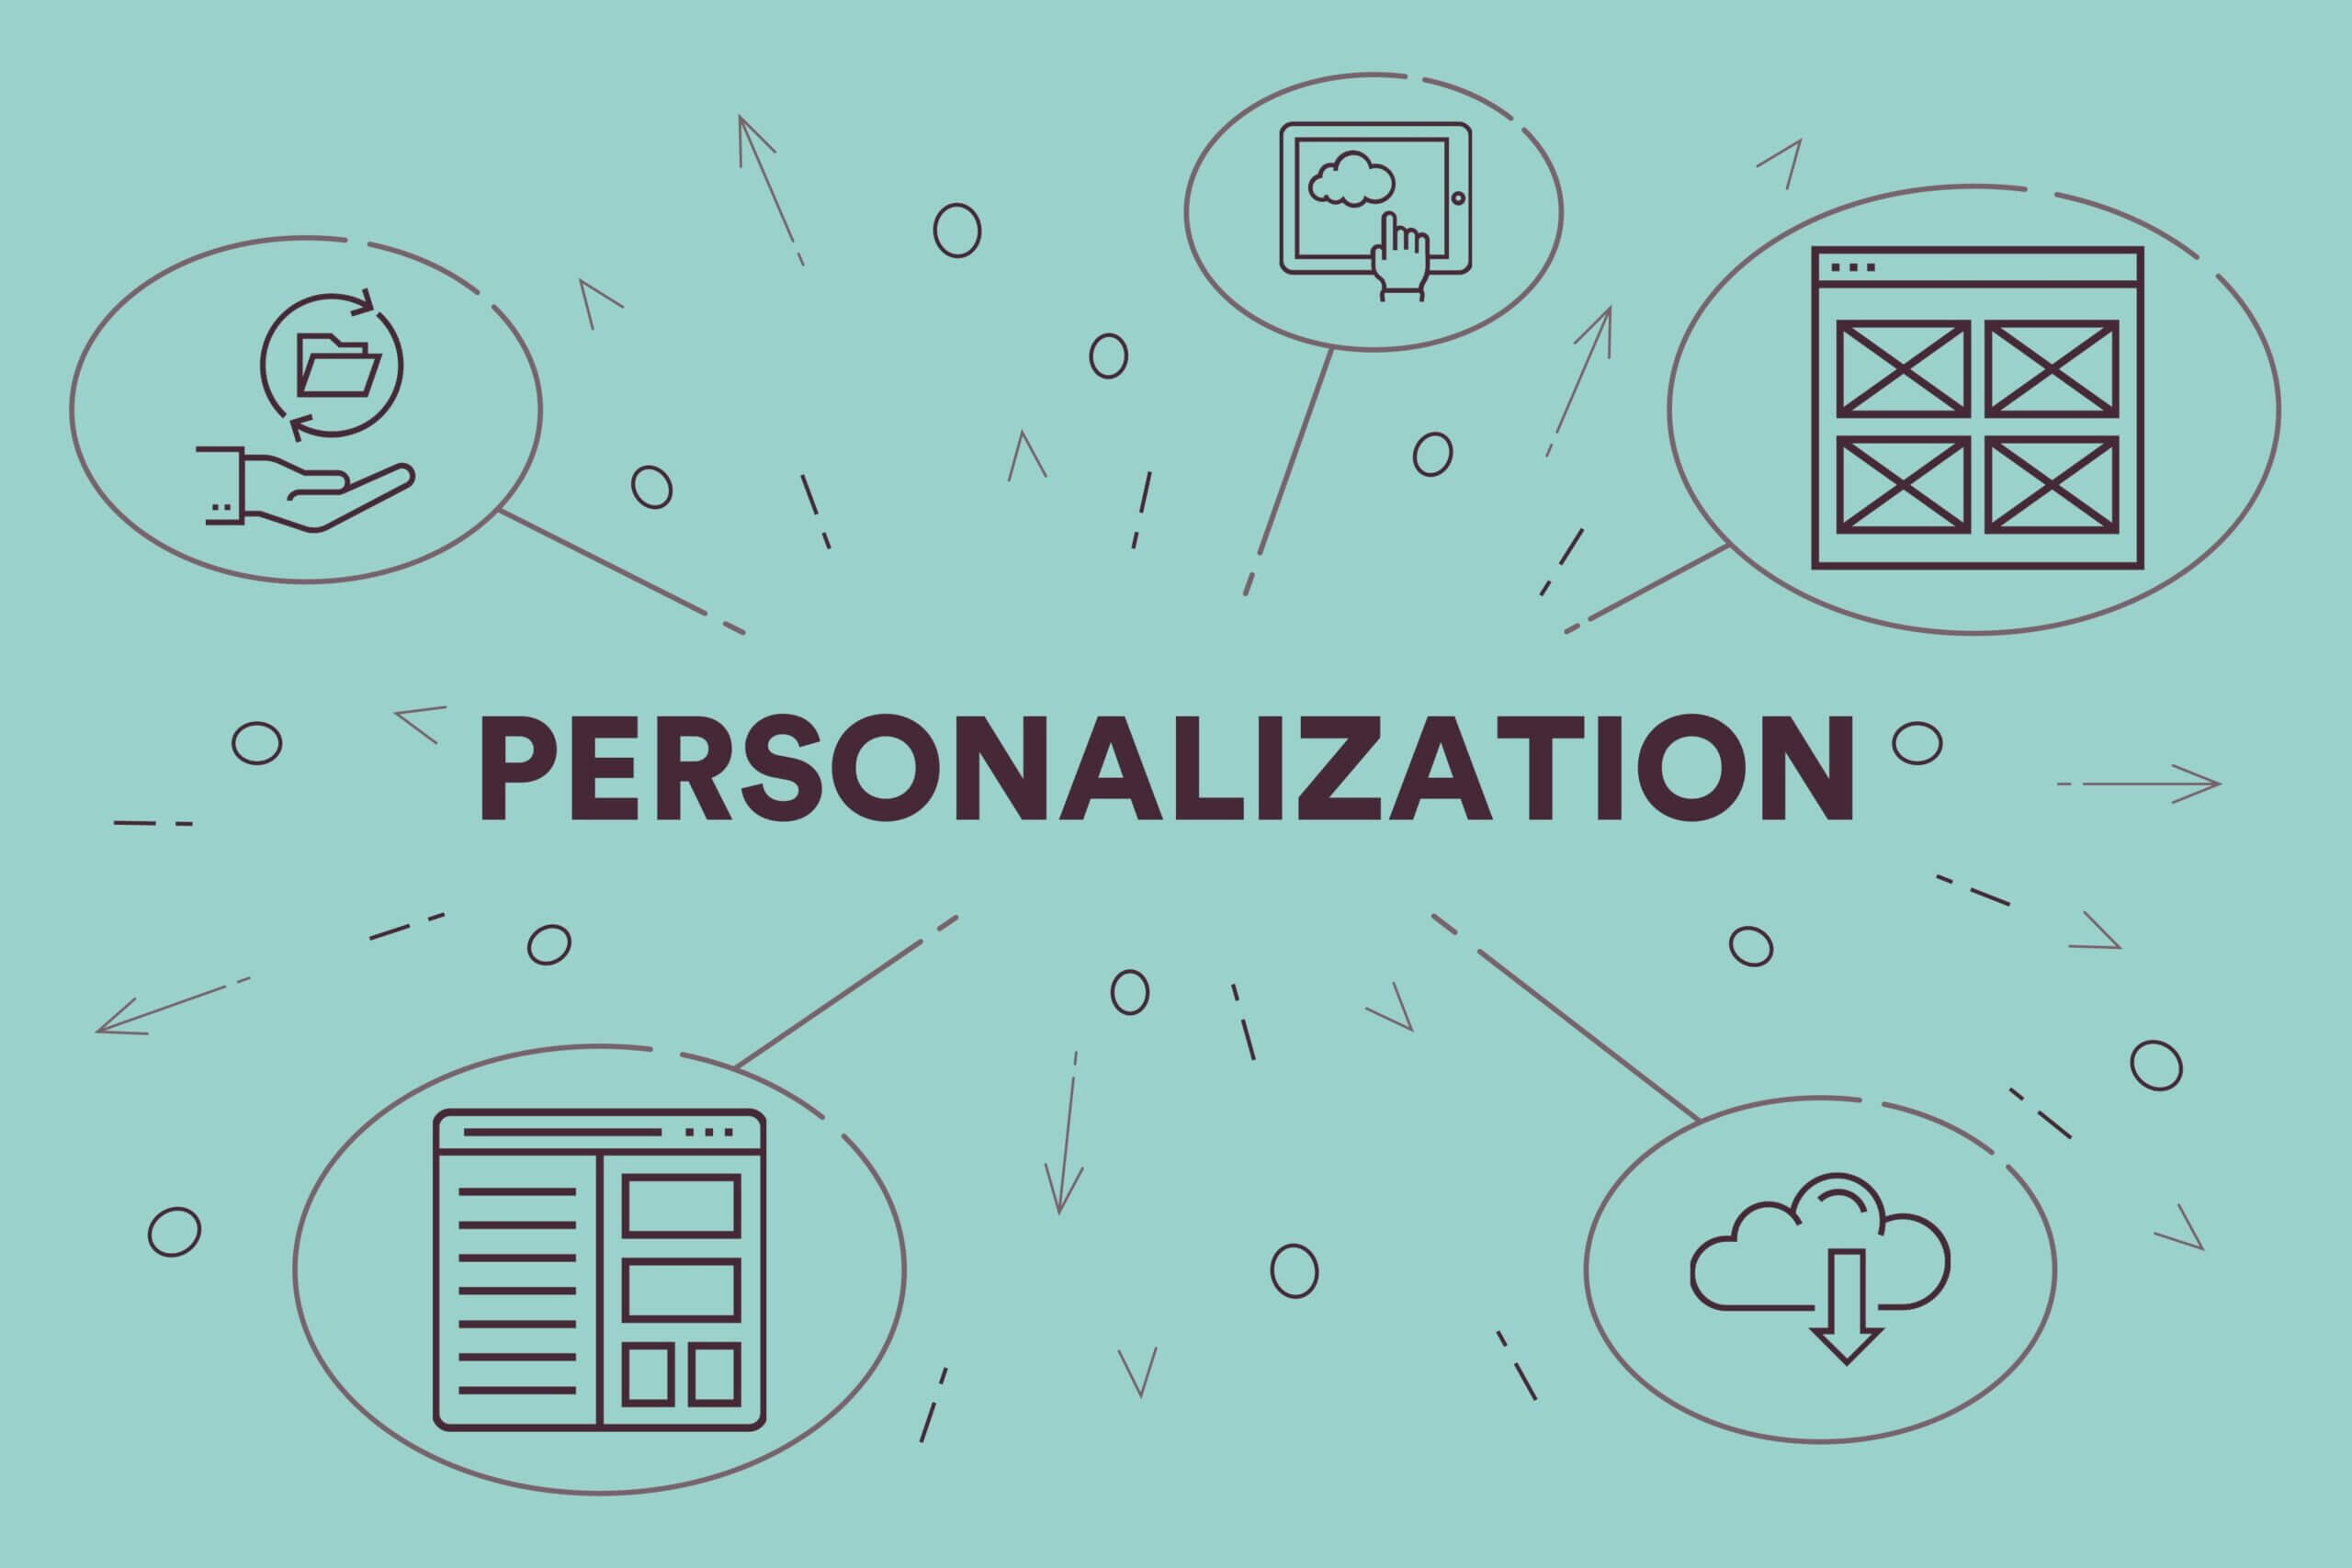 The word personalization on a blue background with different icons surrounding it.